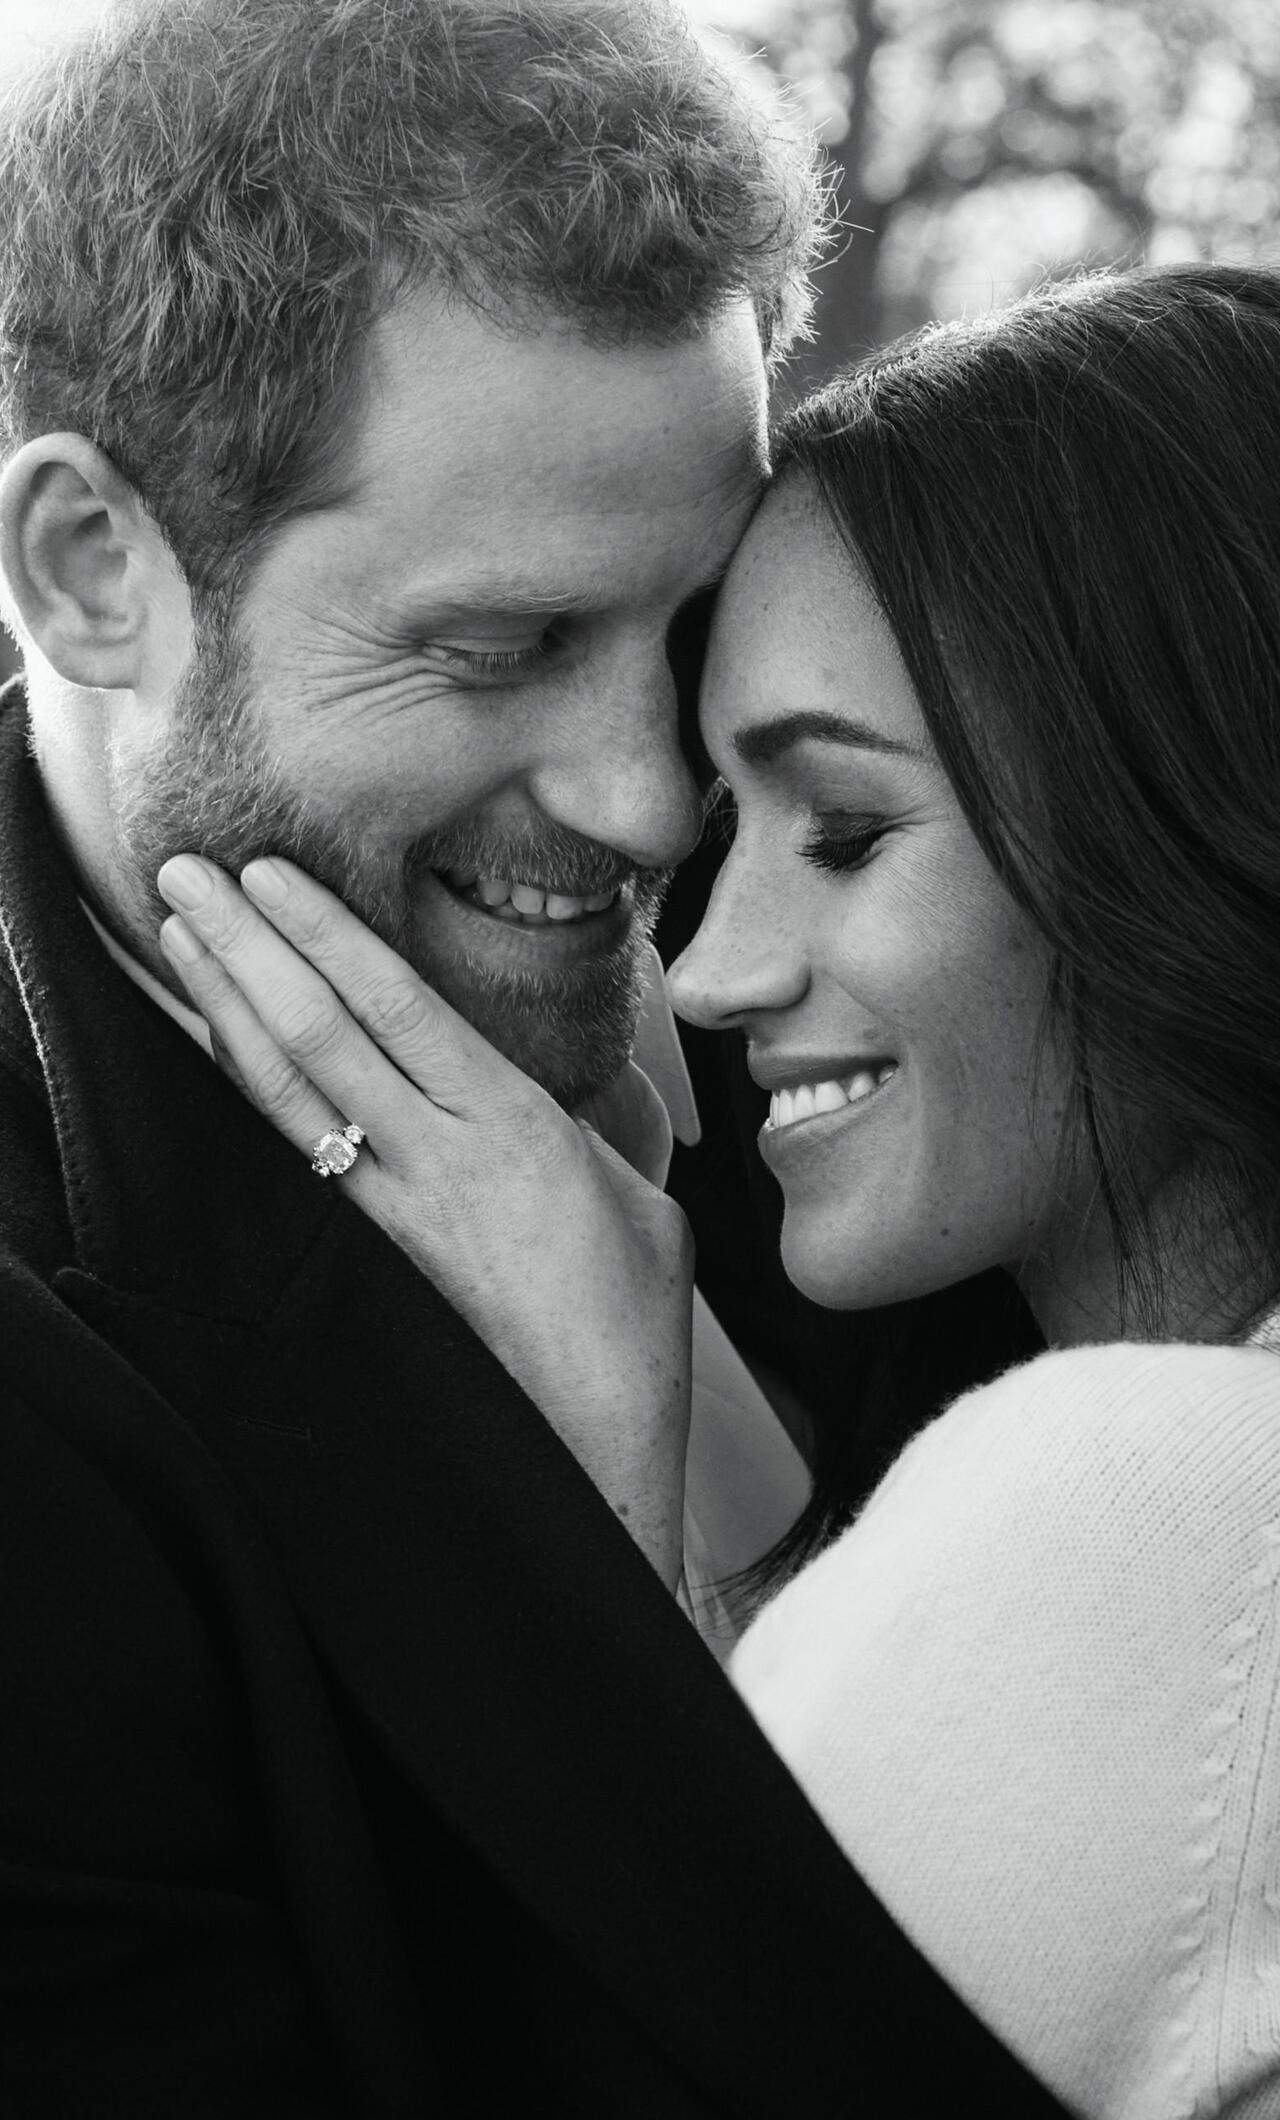 Prince Harry and Meghan Markle, iPhone 6 wallpapers, High-quality backgrounds, Royal couple, 1280x2120 HD Handy